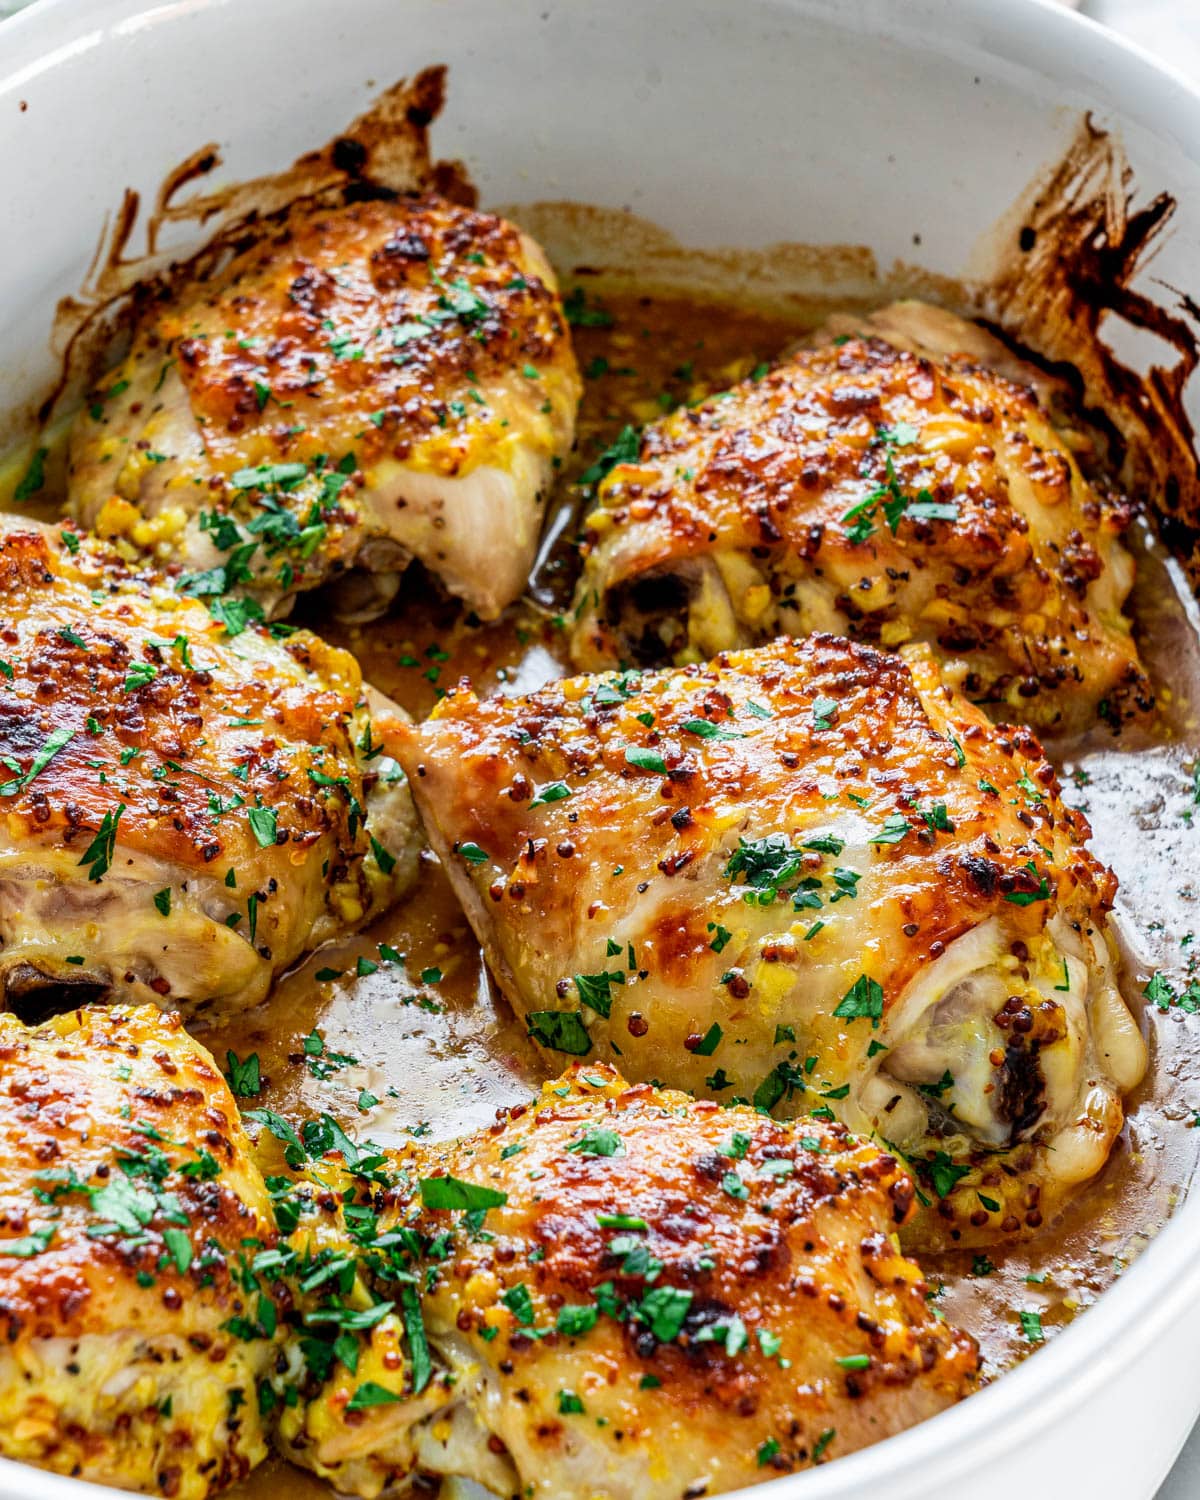 baked chicken thighs in a white baking dish garnished with parsley